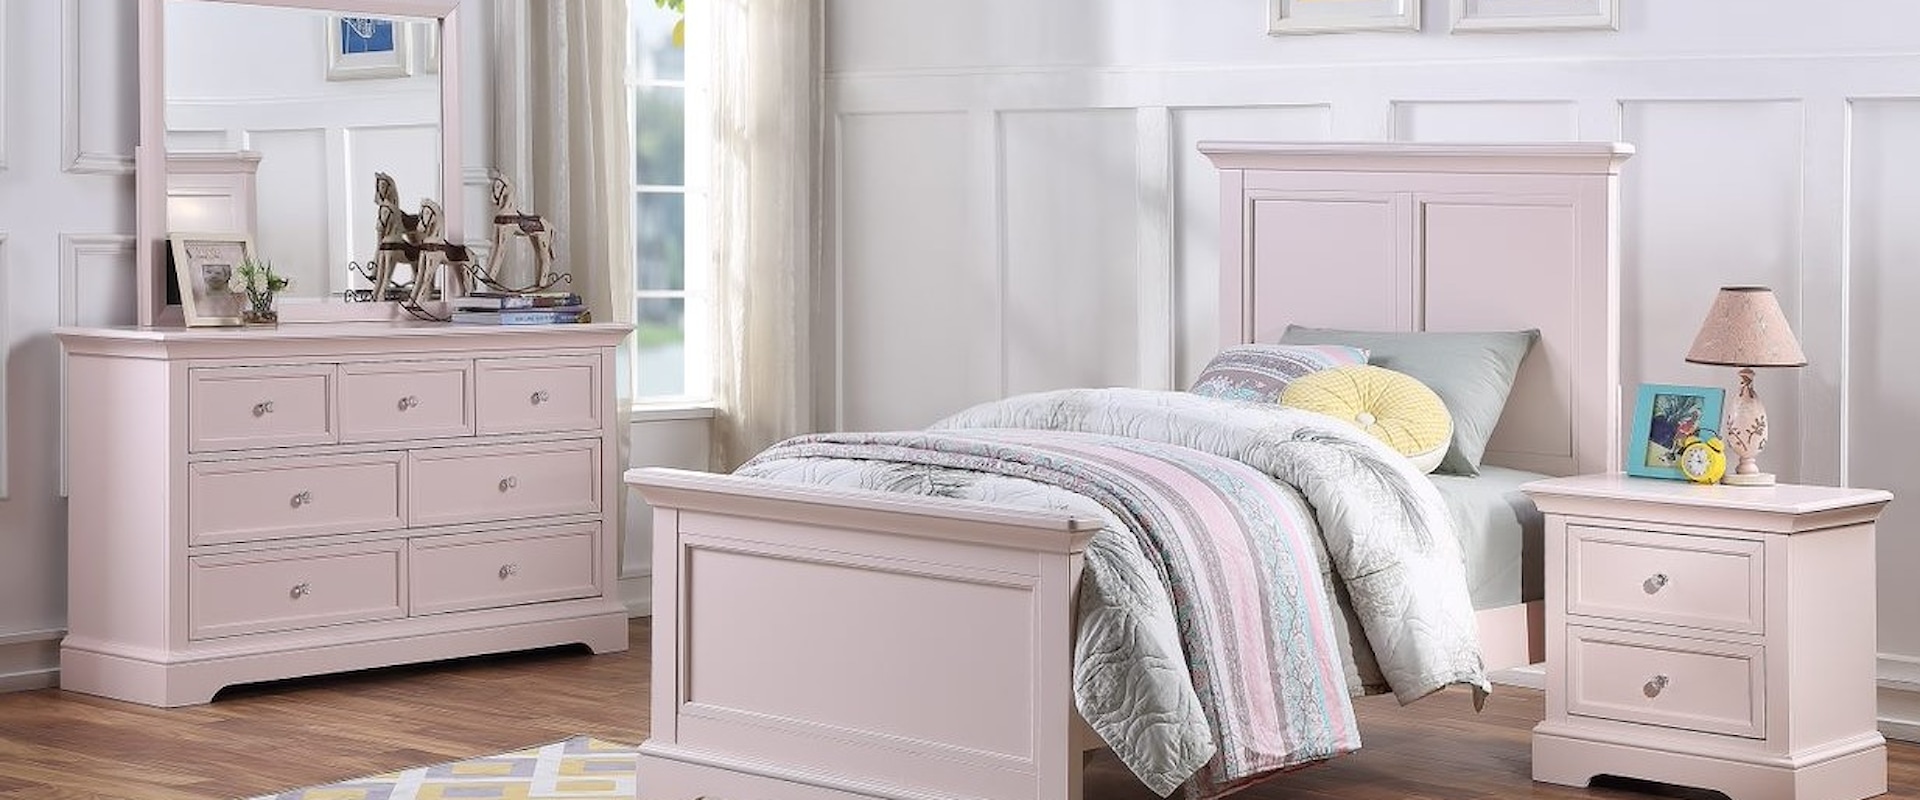 Transitional Youth 4-Piece Full Bedroom Set